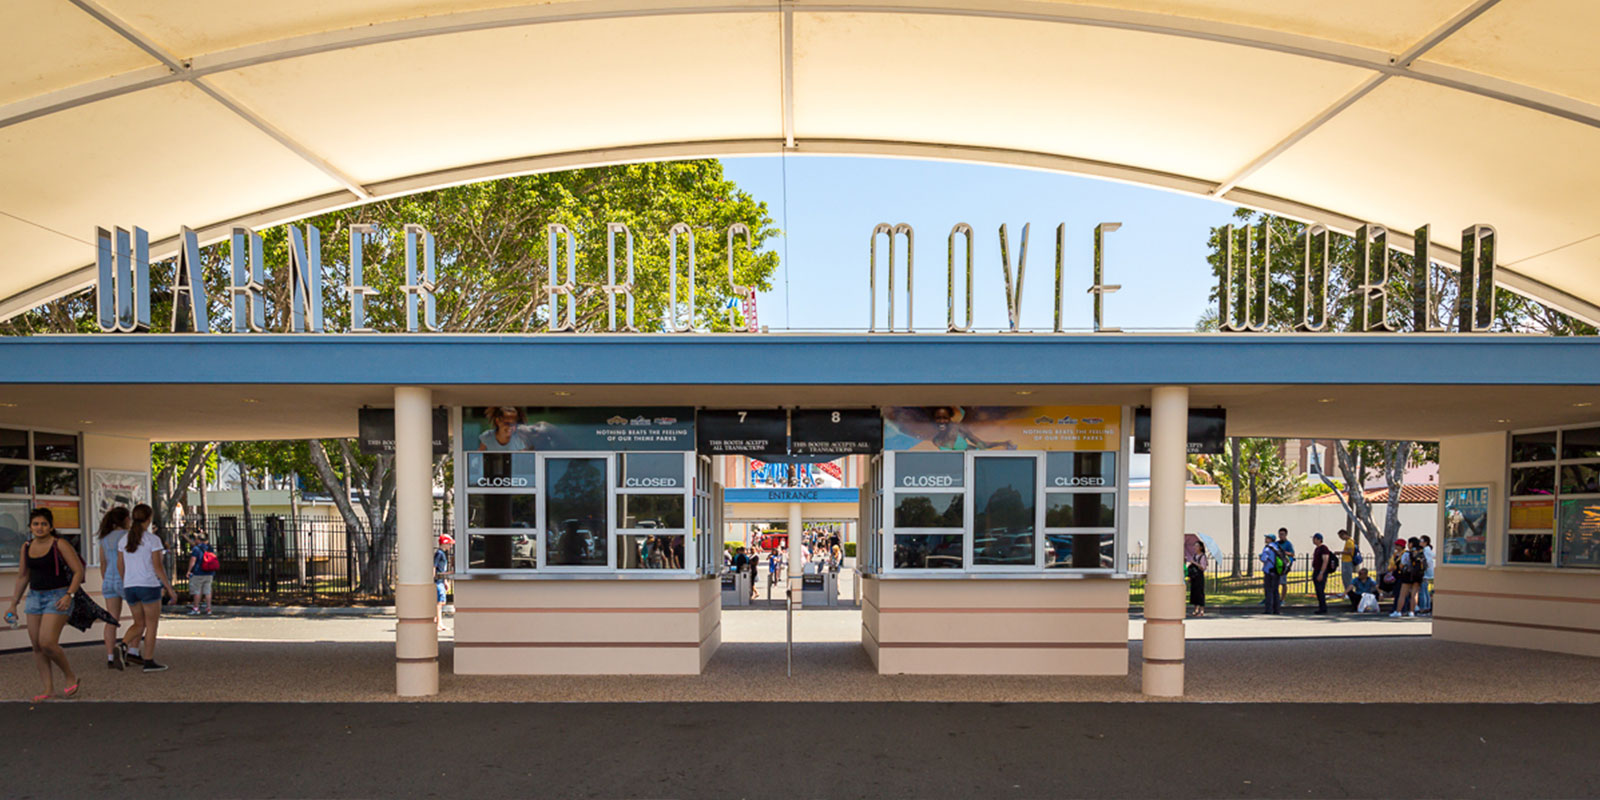 Warner Bros. Movie World Review, Hollywood on the Gold Coast